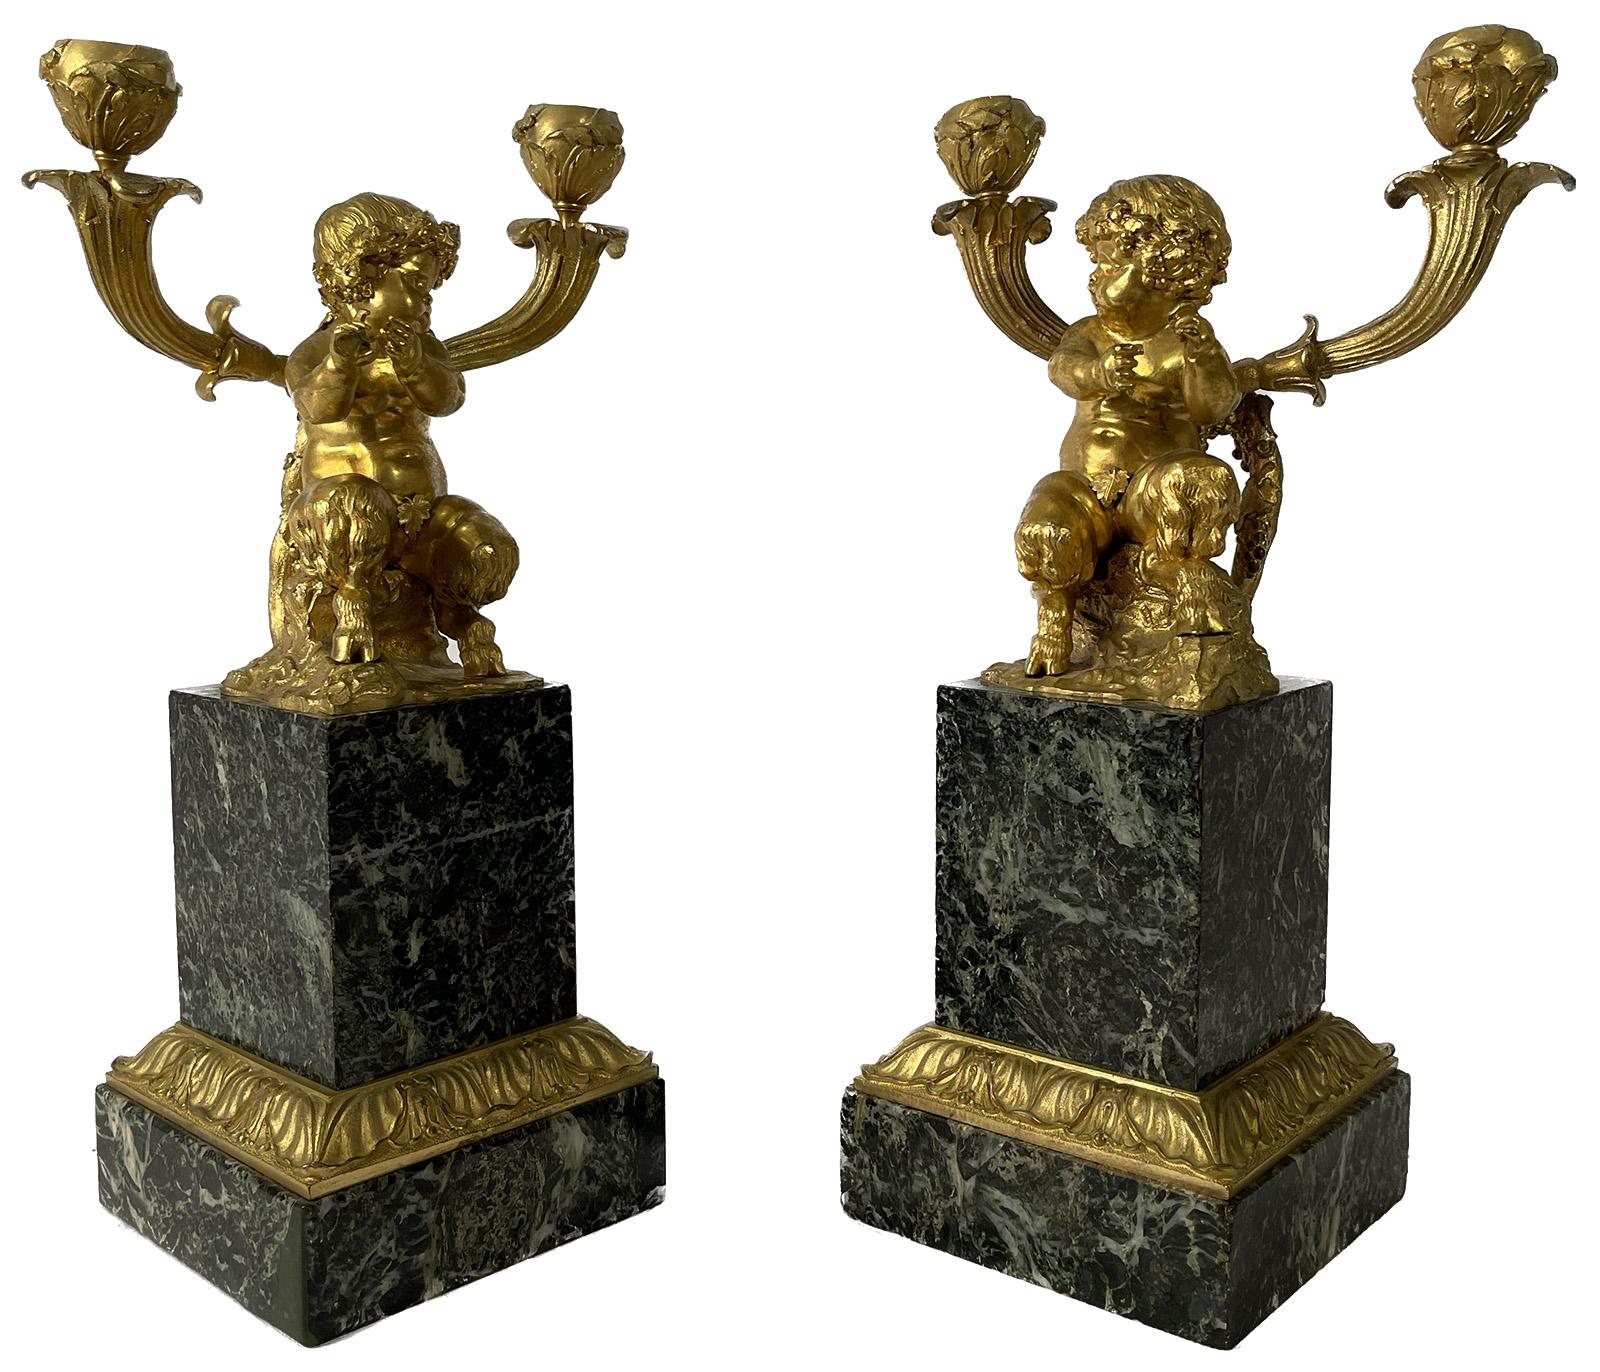 A pair of early 19th century marble and gilt bronze figural candelabras.

Dimensions: 14.25